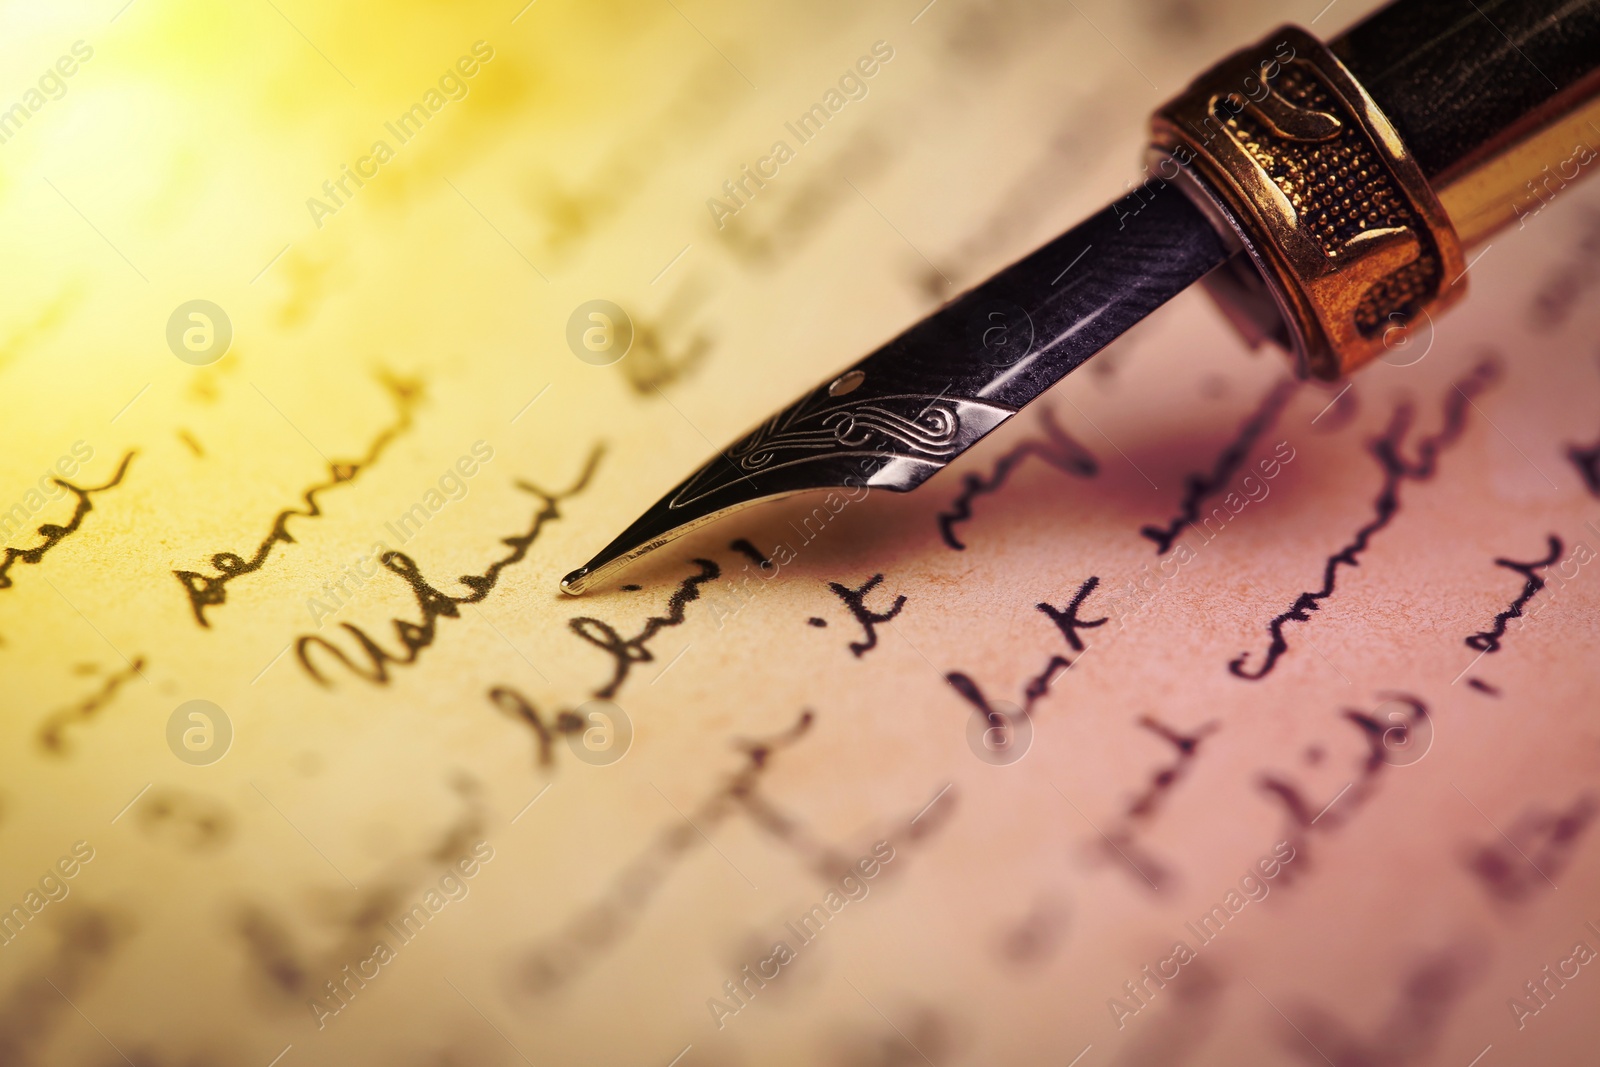 Image of Writing letter with fountain pen, closeup view